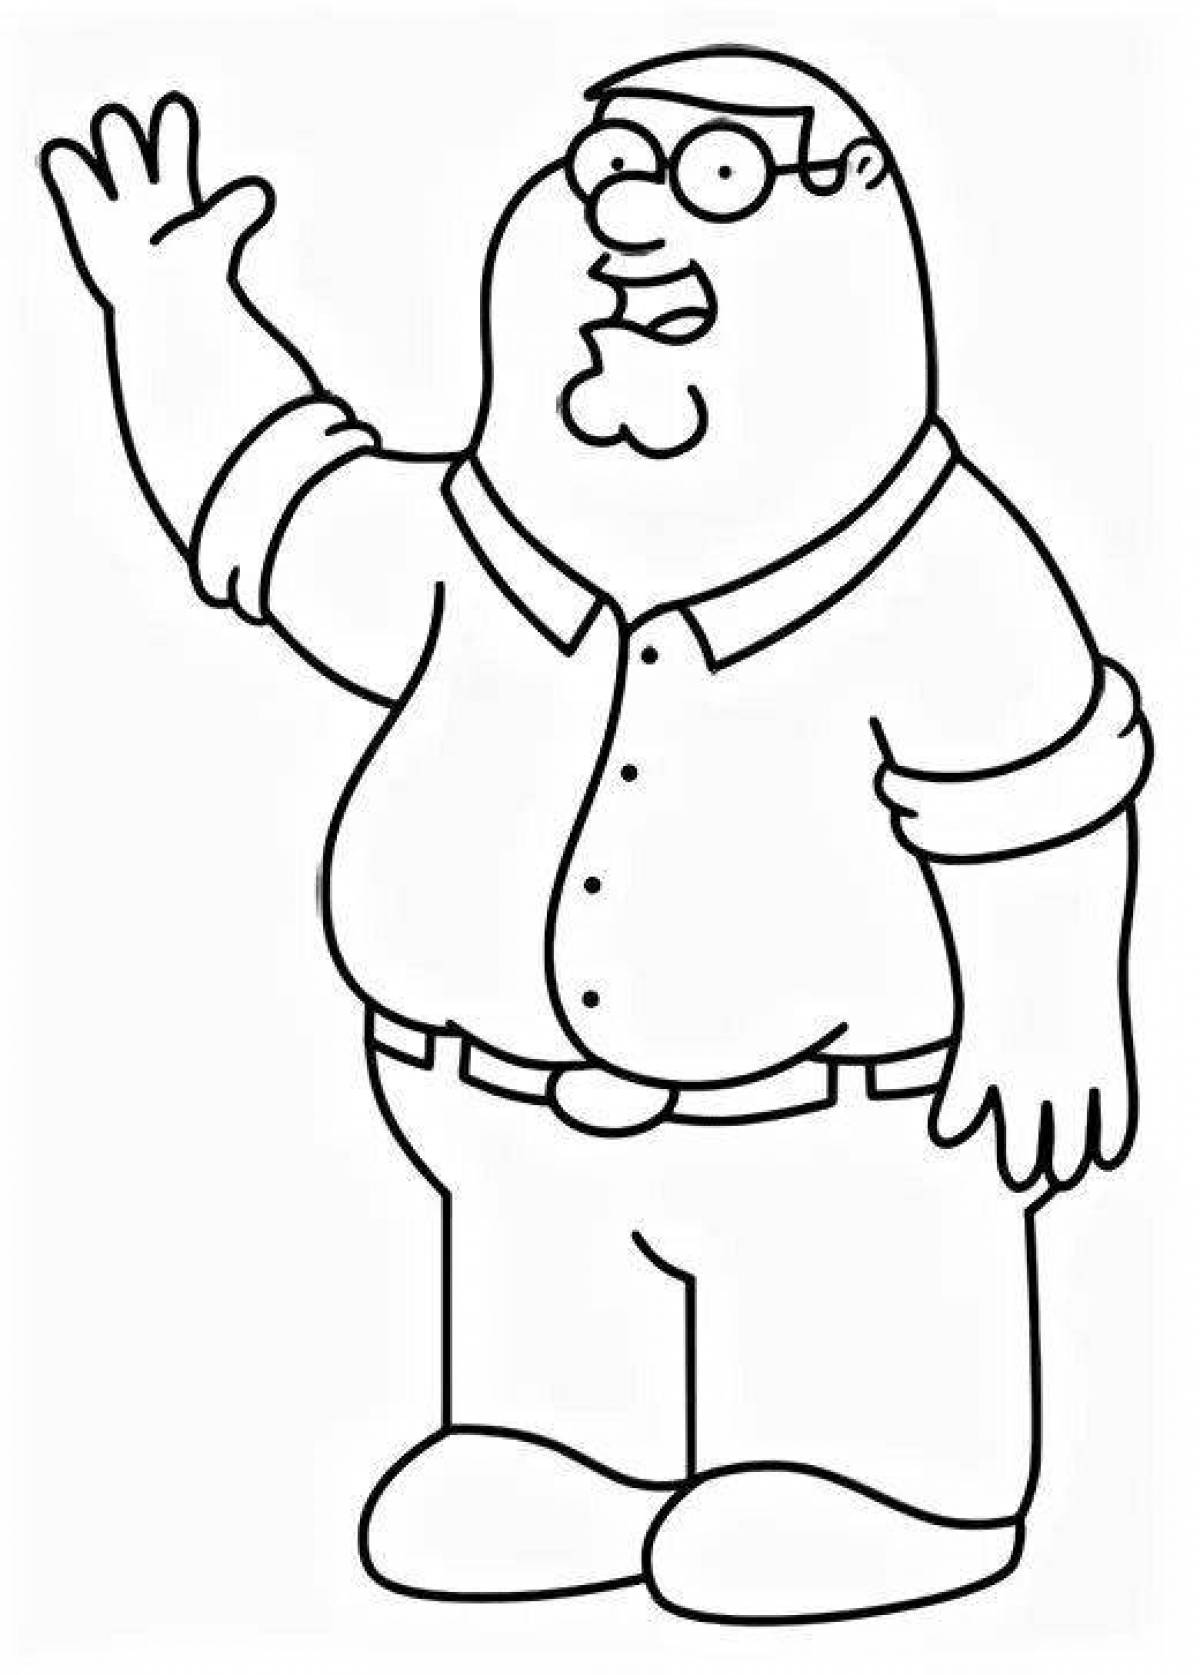 Colouring funny peter griffin